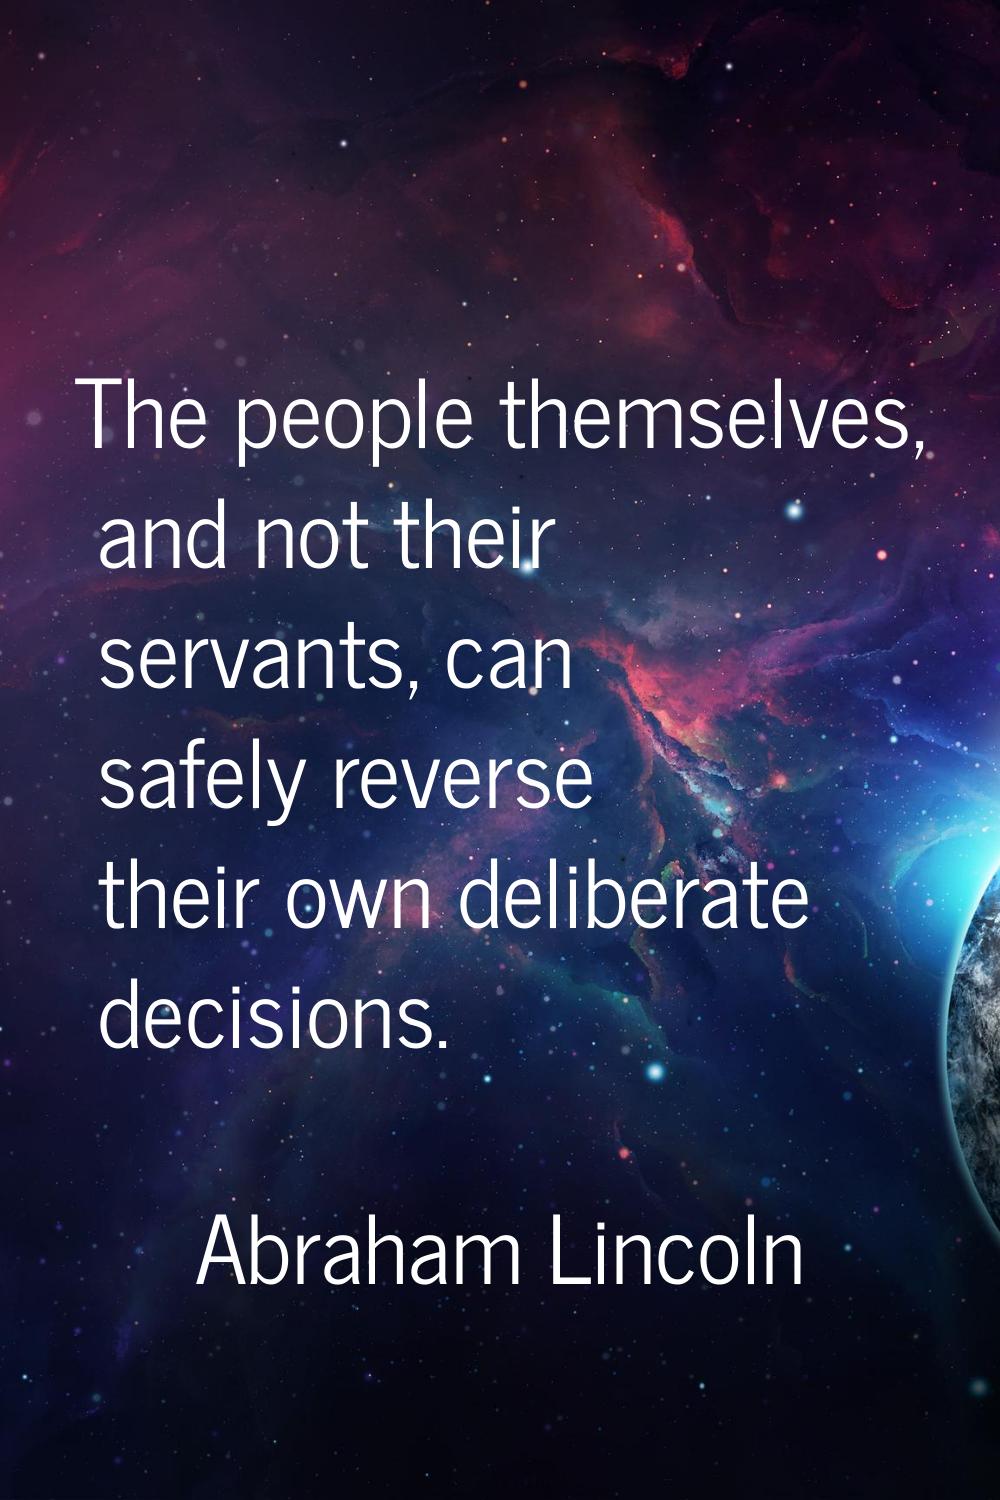 The people themselves, and not their servants, can safely reverse their own deliberate decisions.